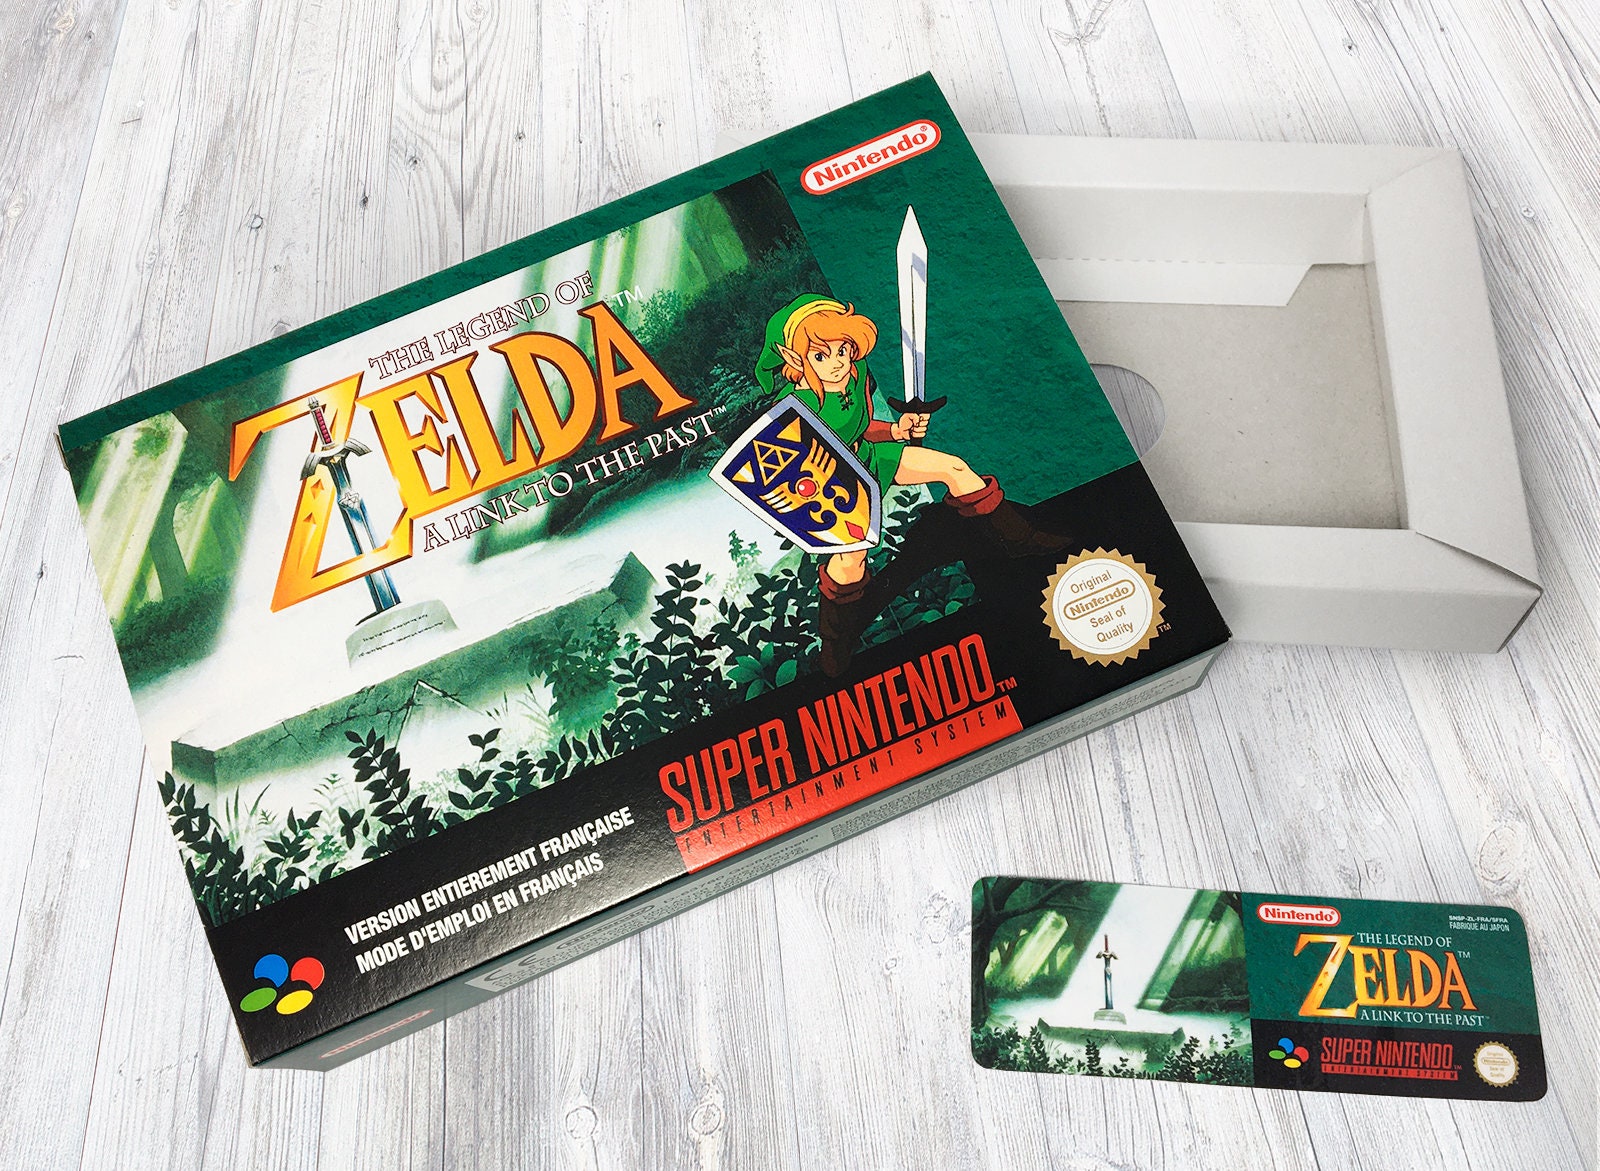 The Legend of Zelda A Link To The Past Super Nintendo SNES Boxed *Complete*  PAL